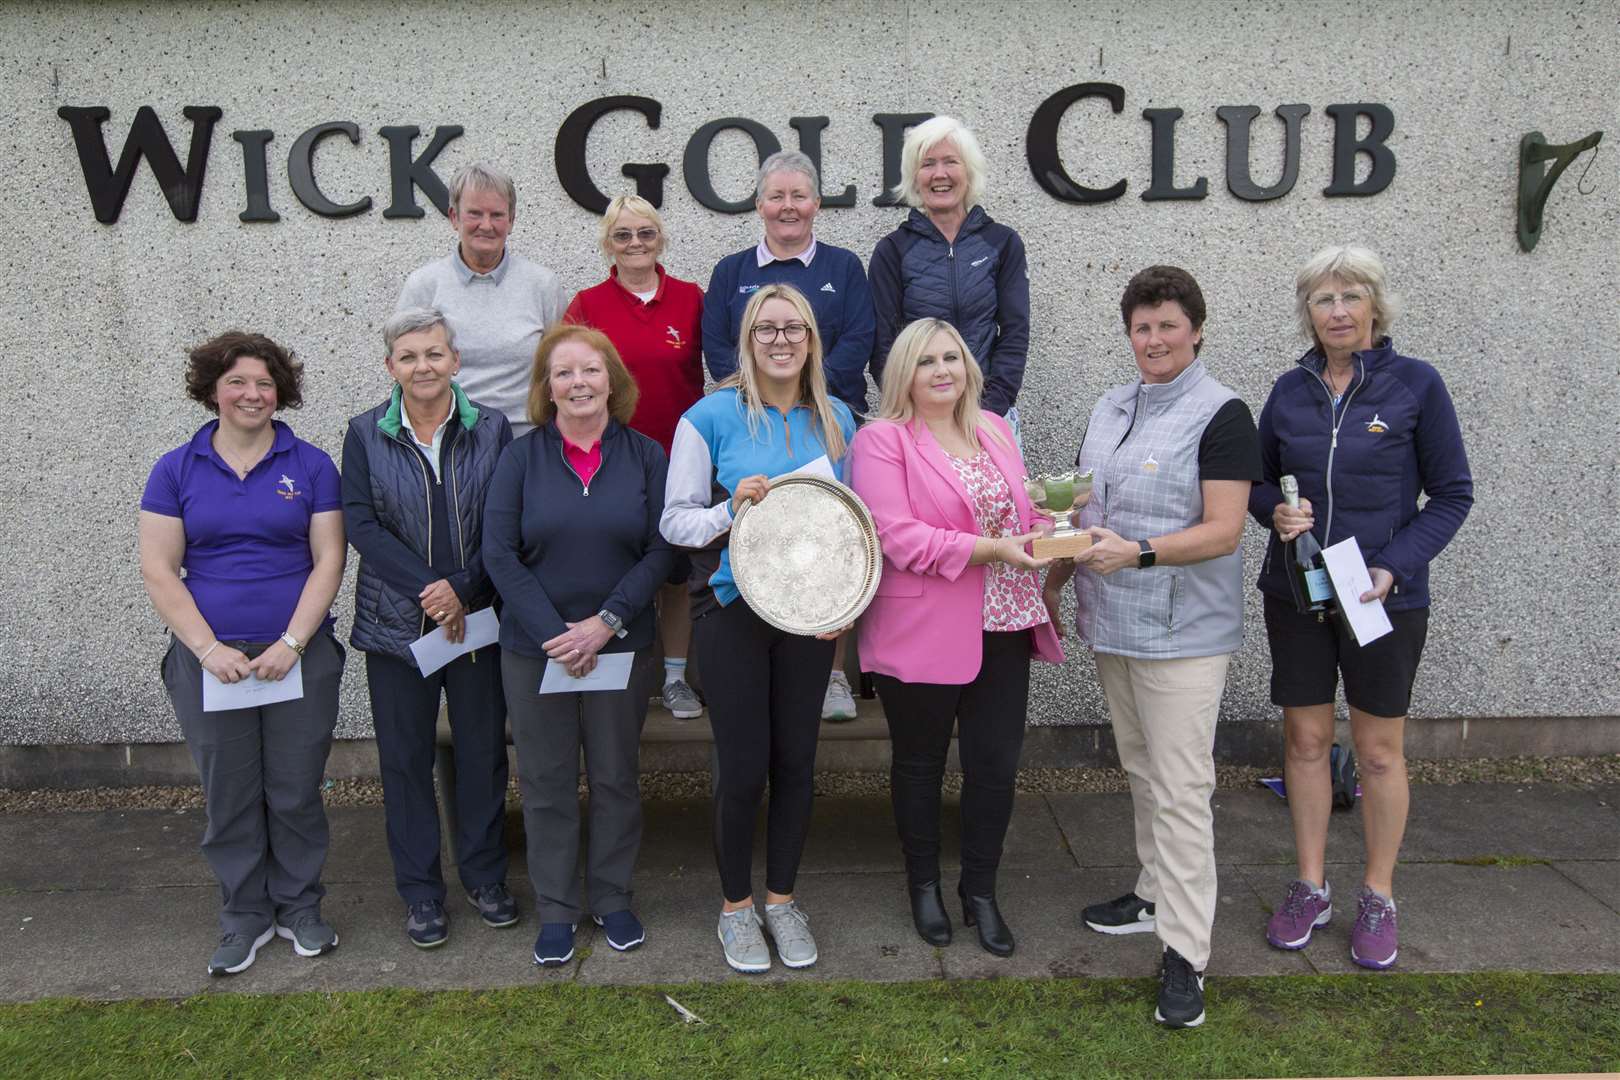 The scratch trophy for the Wick Golf Club's ladies open competition went to a player from the home club when Dee MacAngus (front right) won the award which she received from sponsor Yvonne Fitzgerald of Yvonne Fitzgerald Properties.The handicap trophy went to Emma Durrand of Thurso Gold Club (front centre). Looking on are some of the other prize winners in the competition which was played on Saturday.Picture: Robert MacDonald/Northern Studios